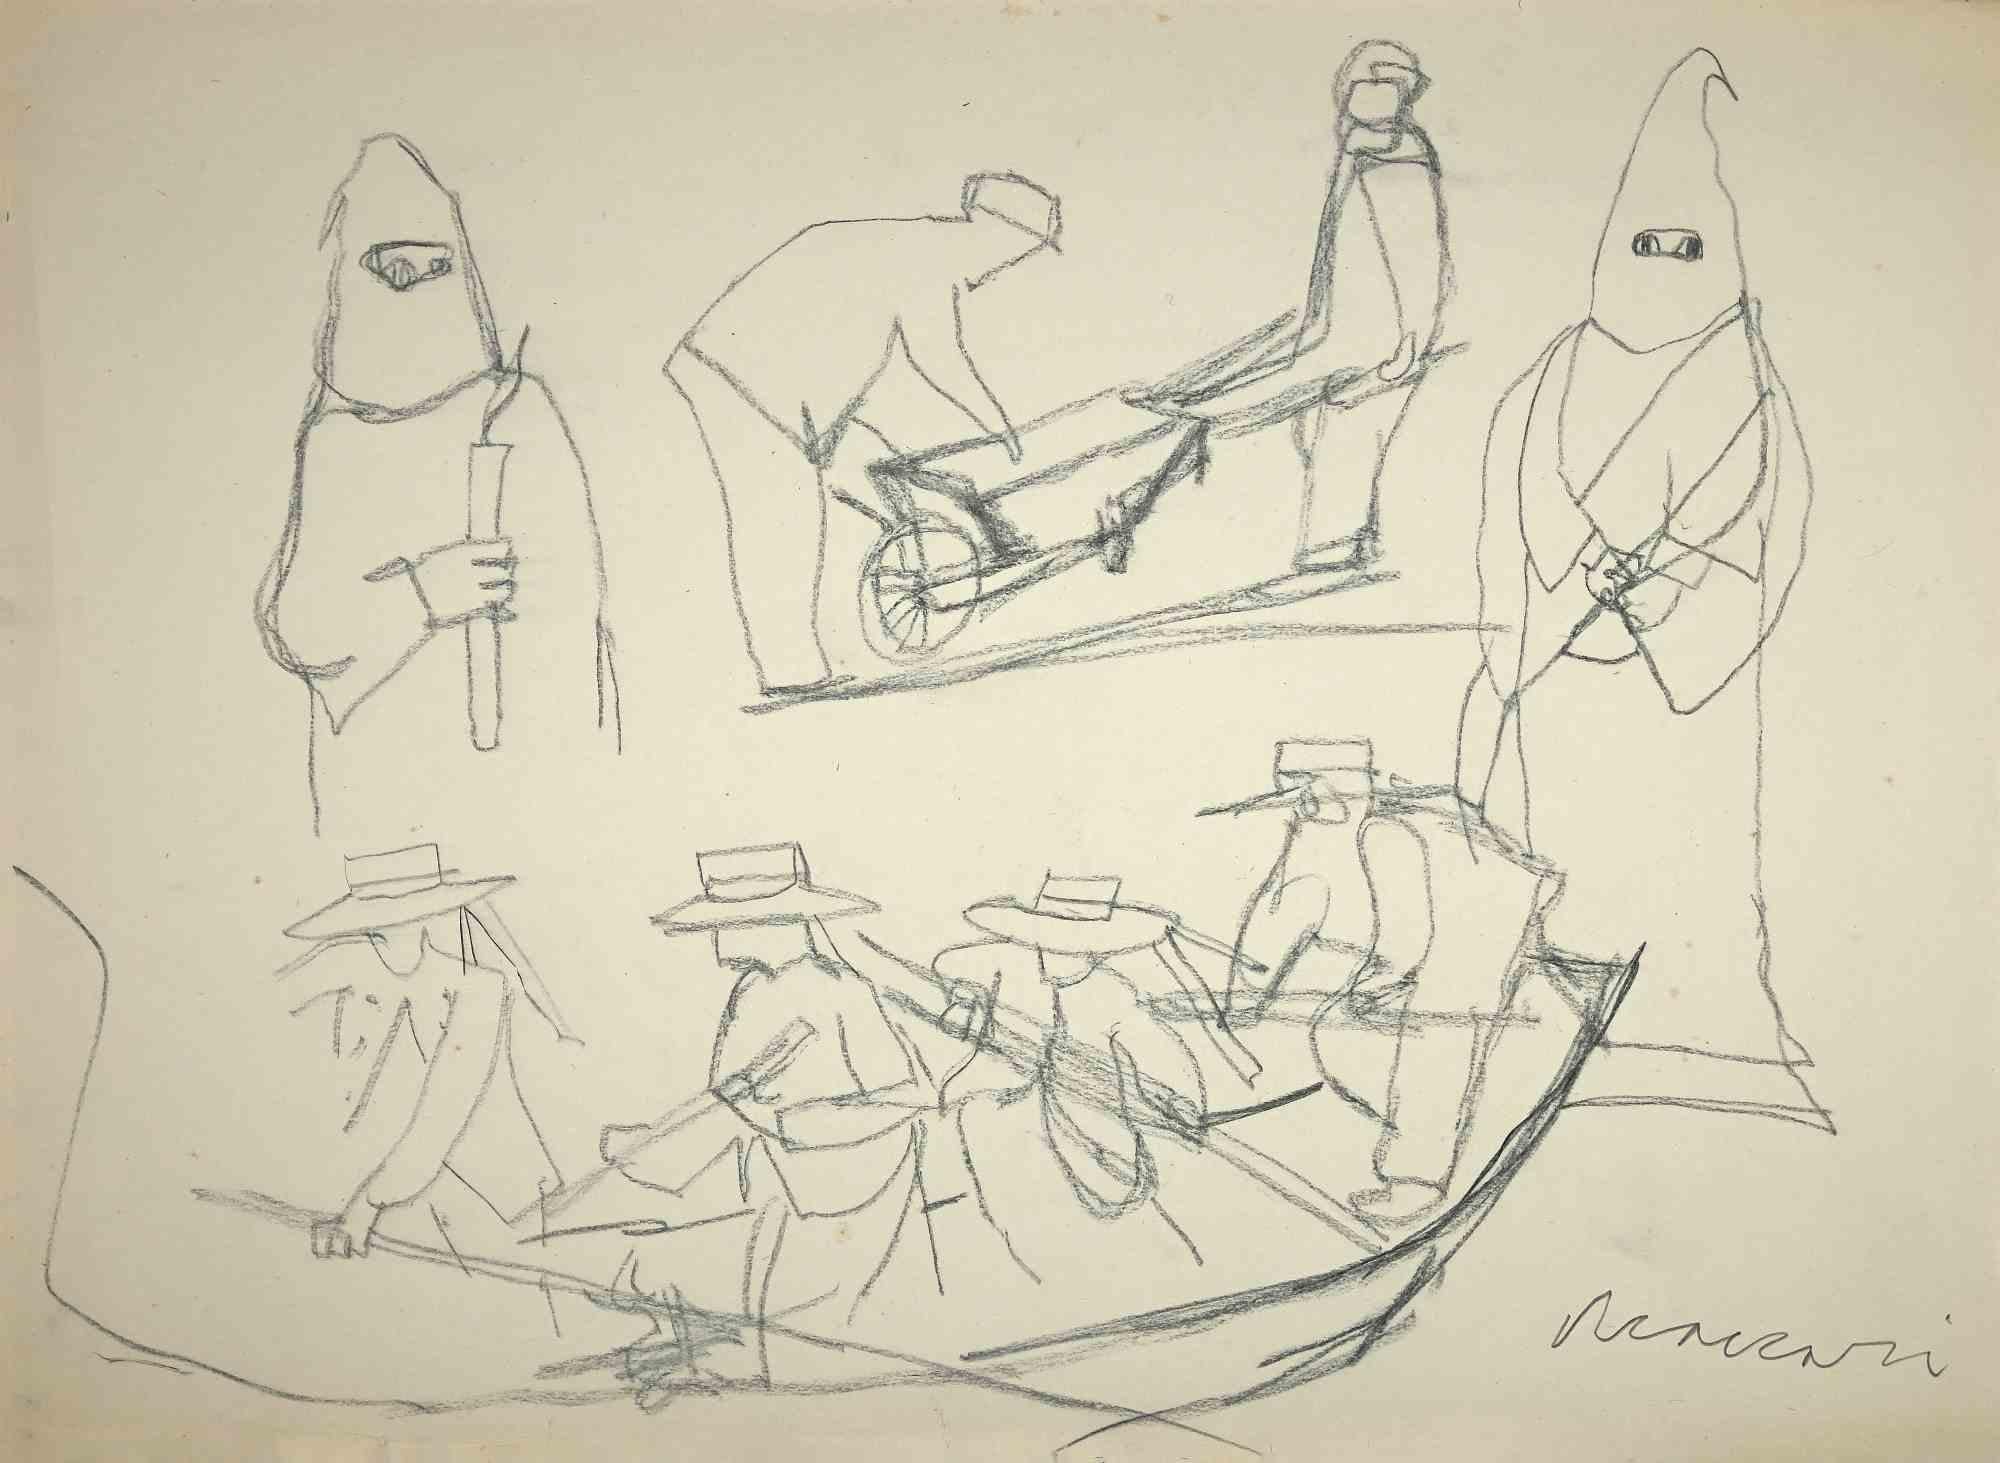 The Escaping is an Original Drawing on creamy-colored paper realized by Mino Maccari in the mid-20th century.

Hand-signed by the artist on the lower.

Good conditions with some small cutting and folding along the margins.

Mino Maccari (1898-1989)